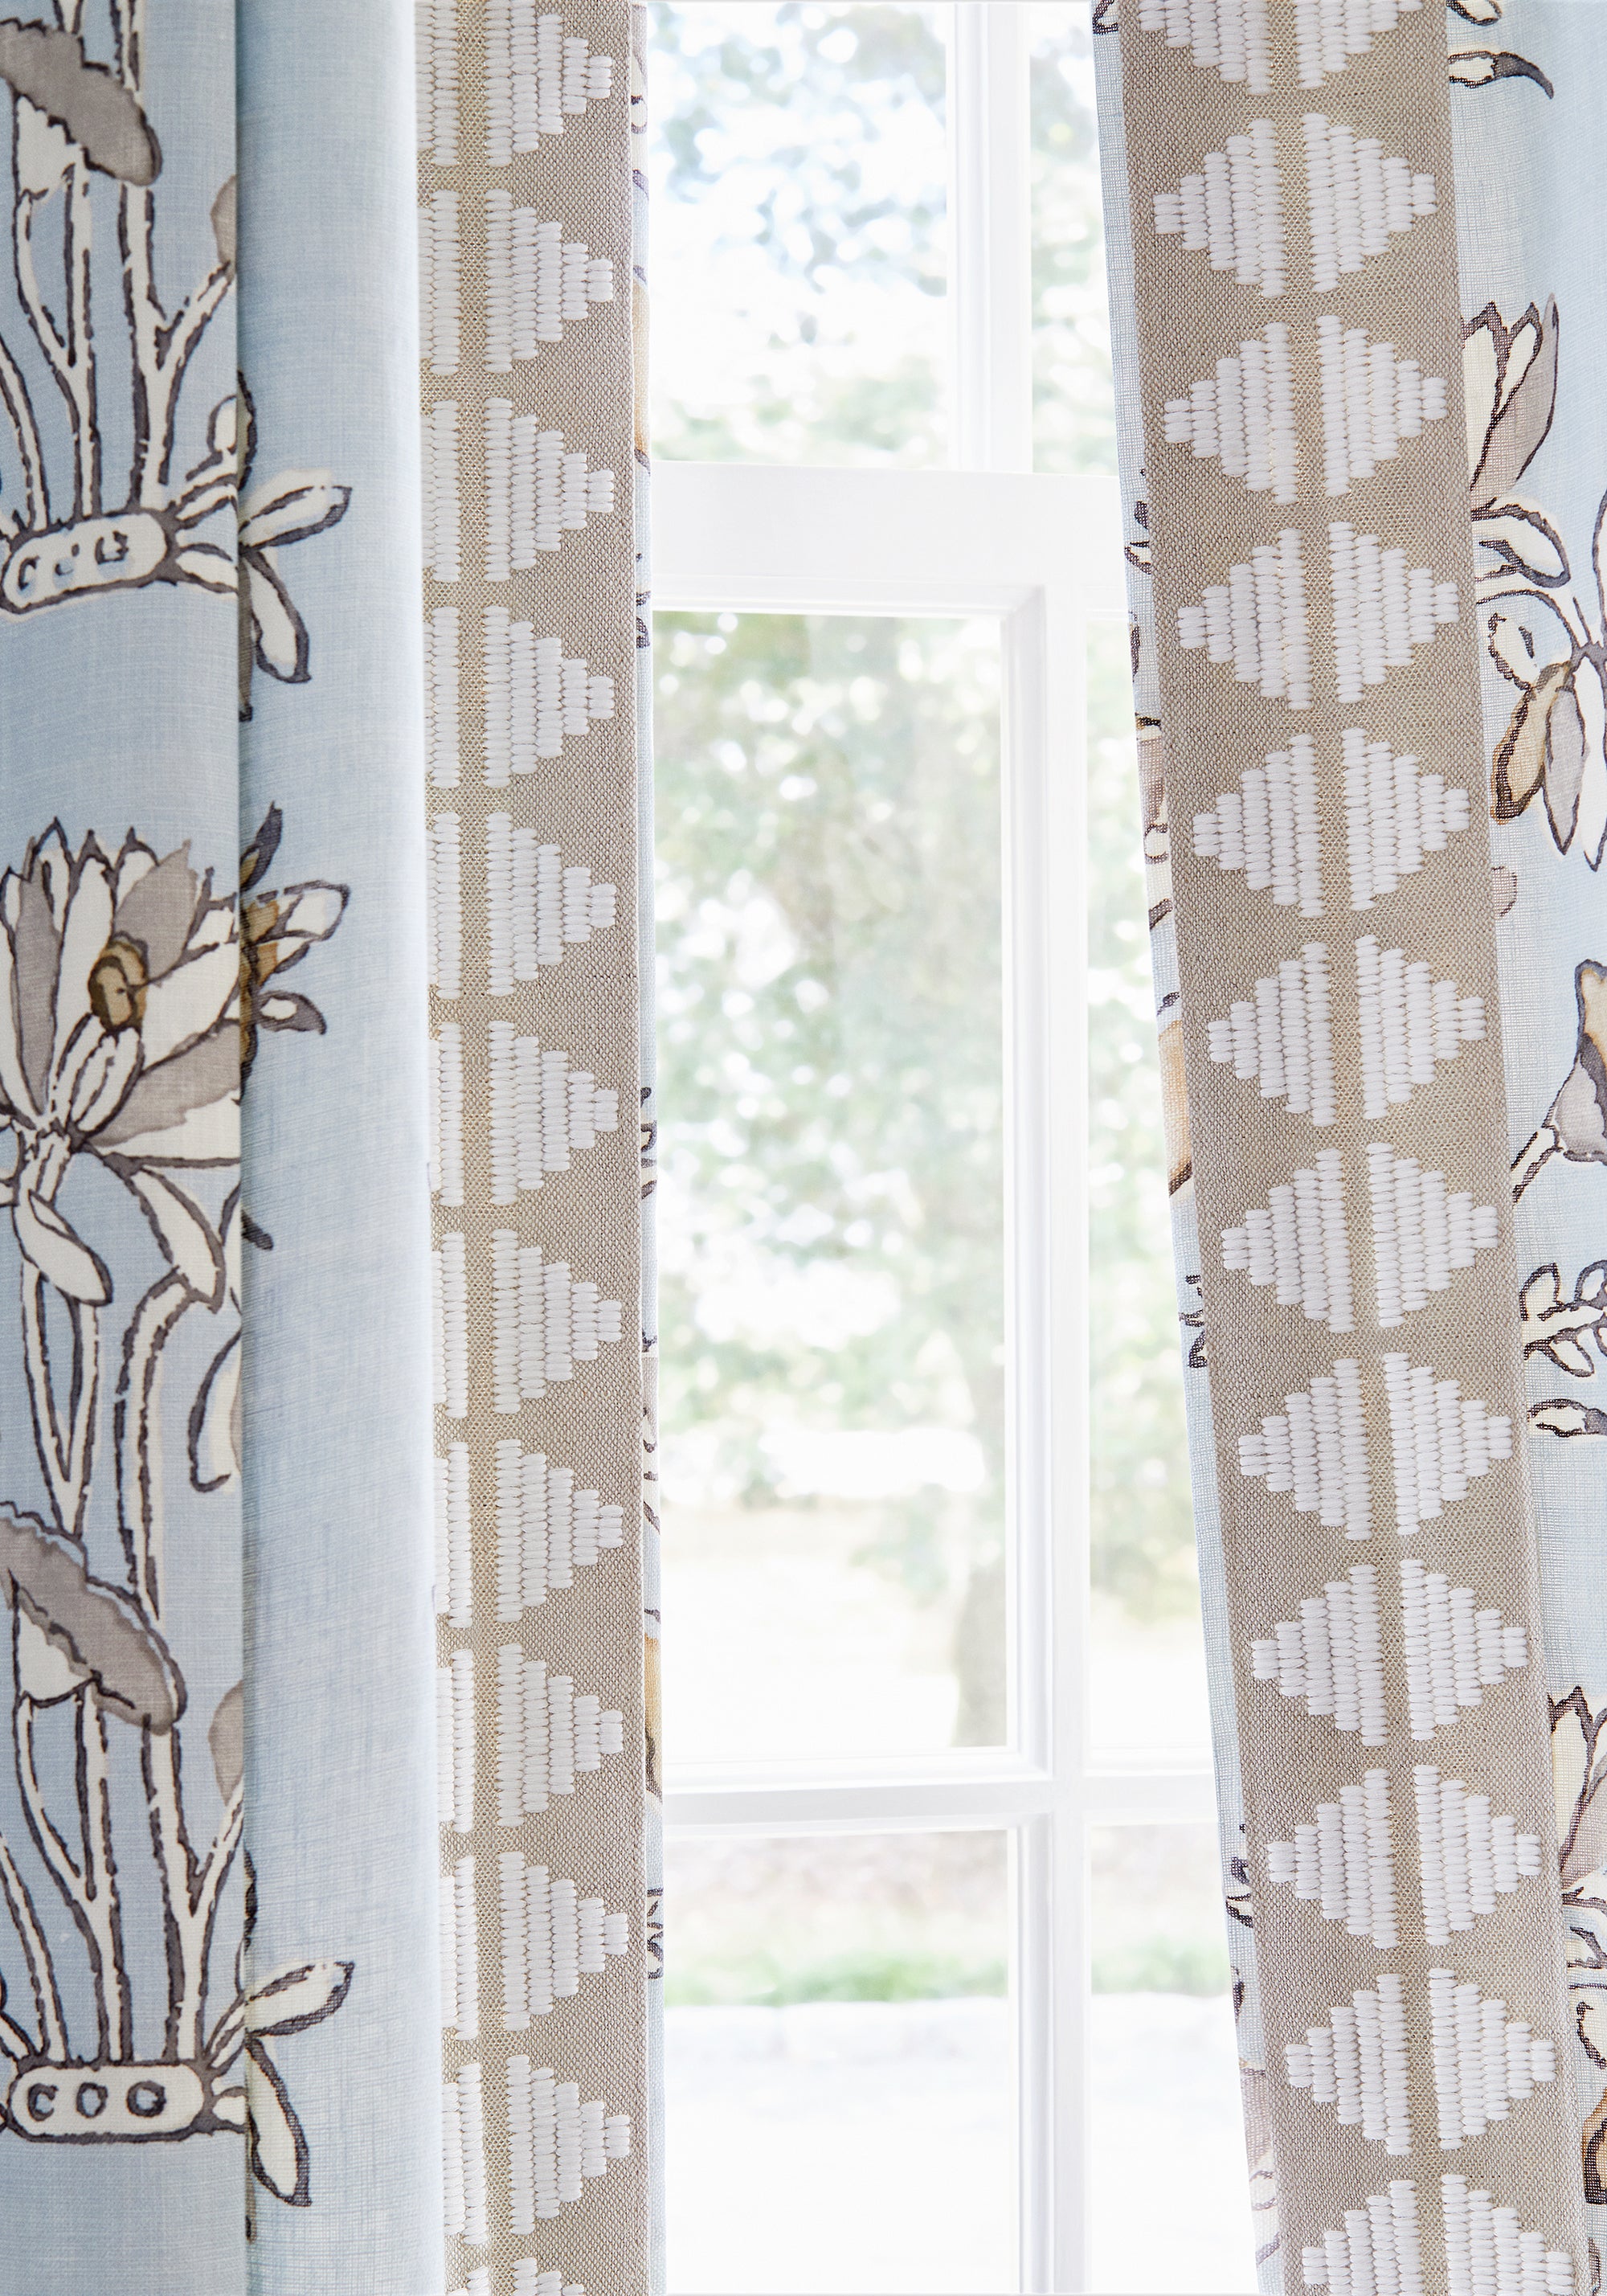 Detail of draperies in Lily Flower printed fabric in spa blue color with linen trim - pattern number F913201 - by Thibaut in the Mesa collection